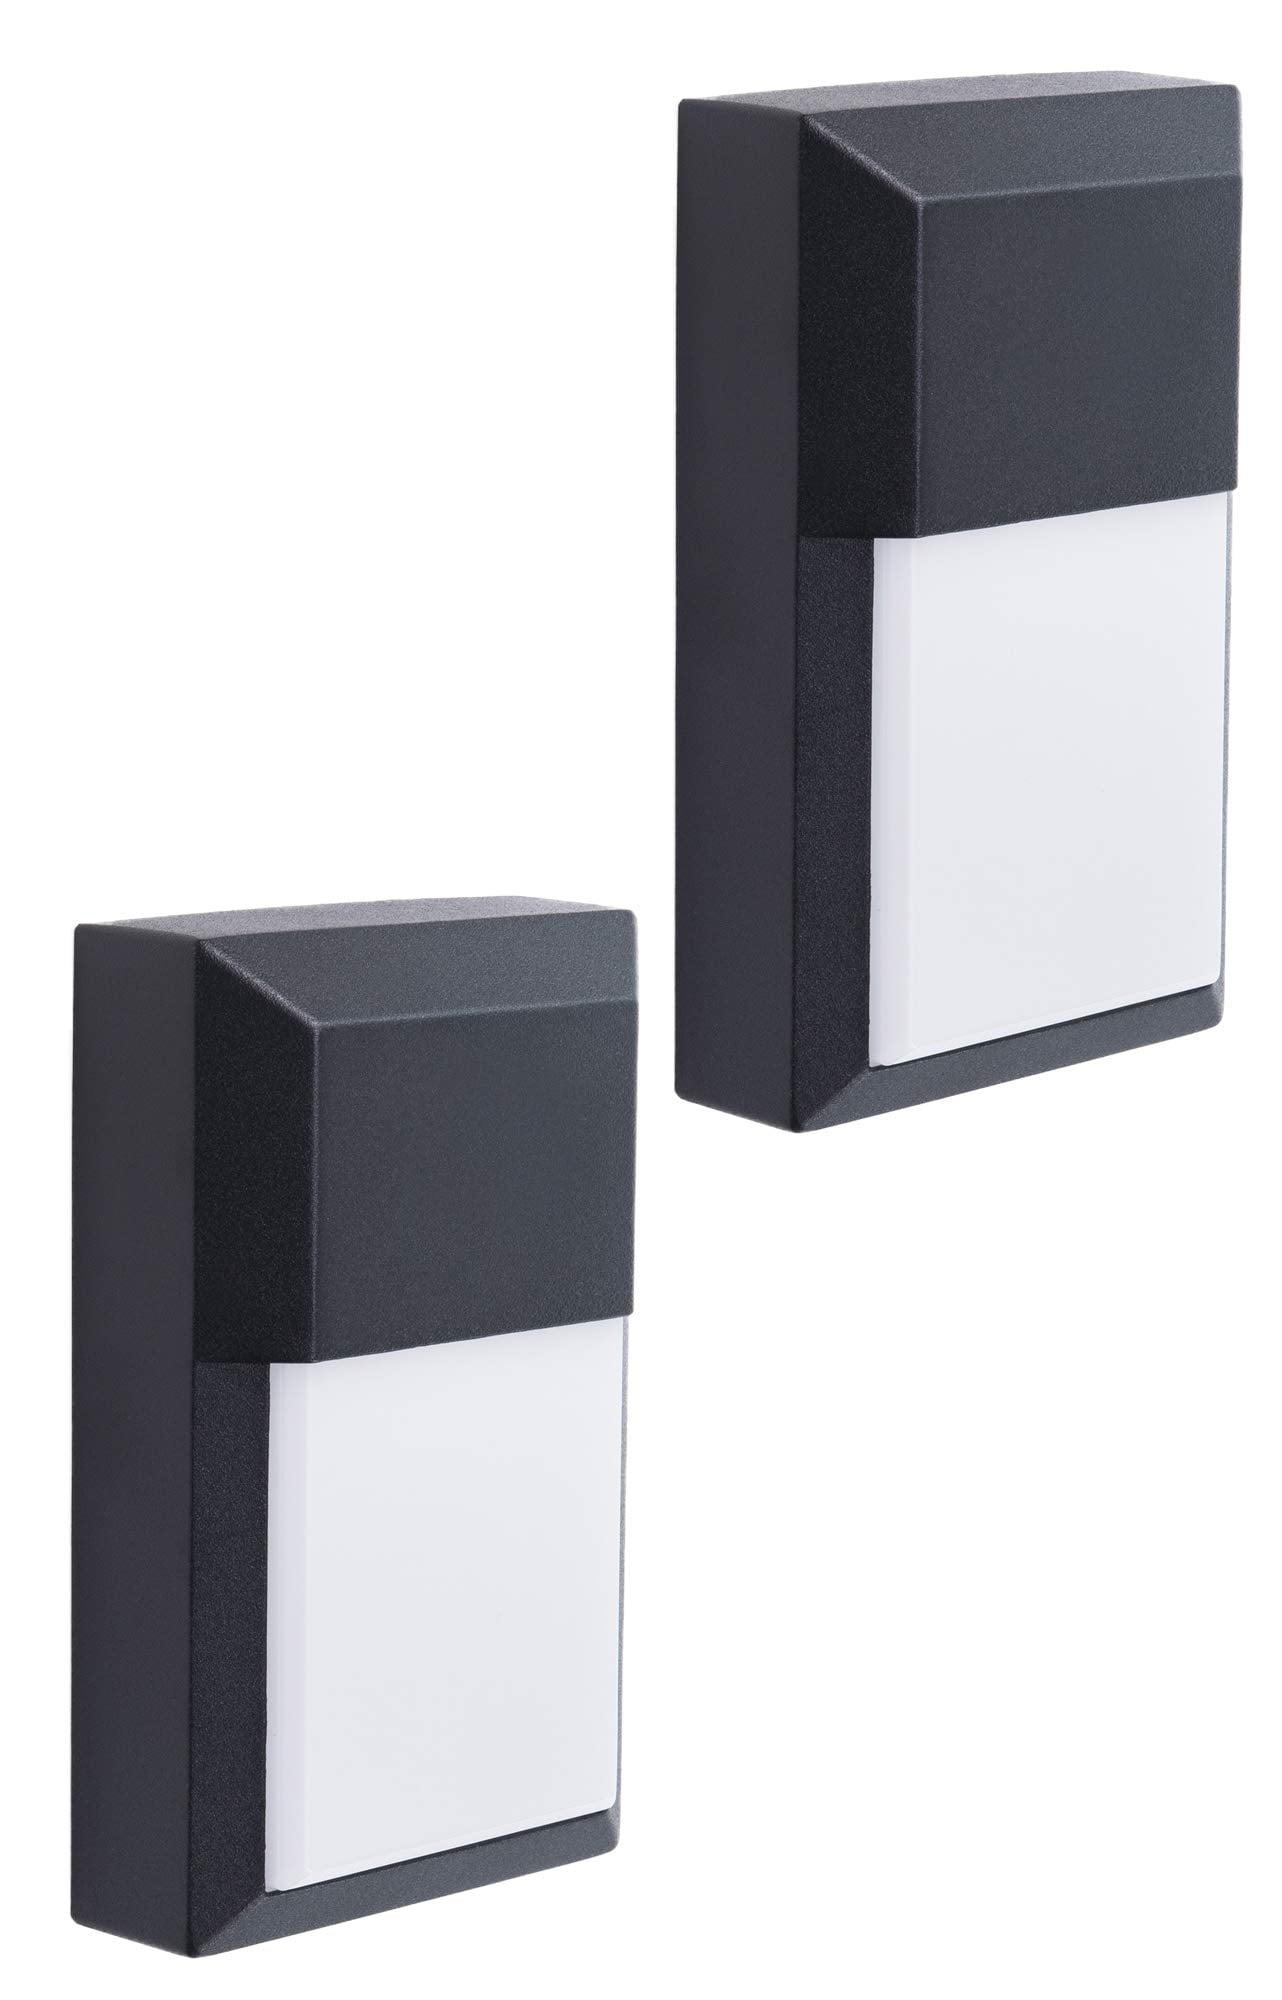 CORAMDEO Outdoor LED Square Wall Sconce Light Durable Cast Aluminum Black Finish 